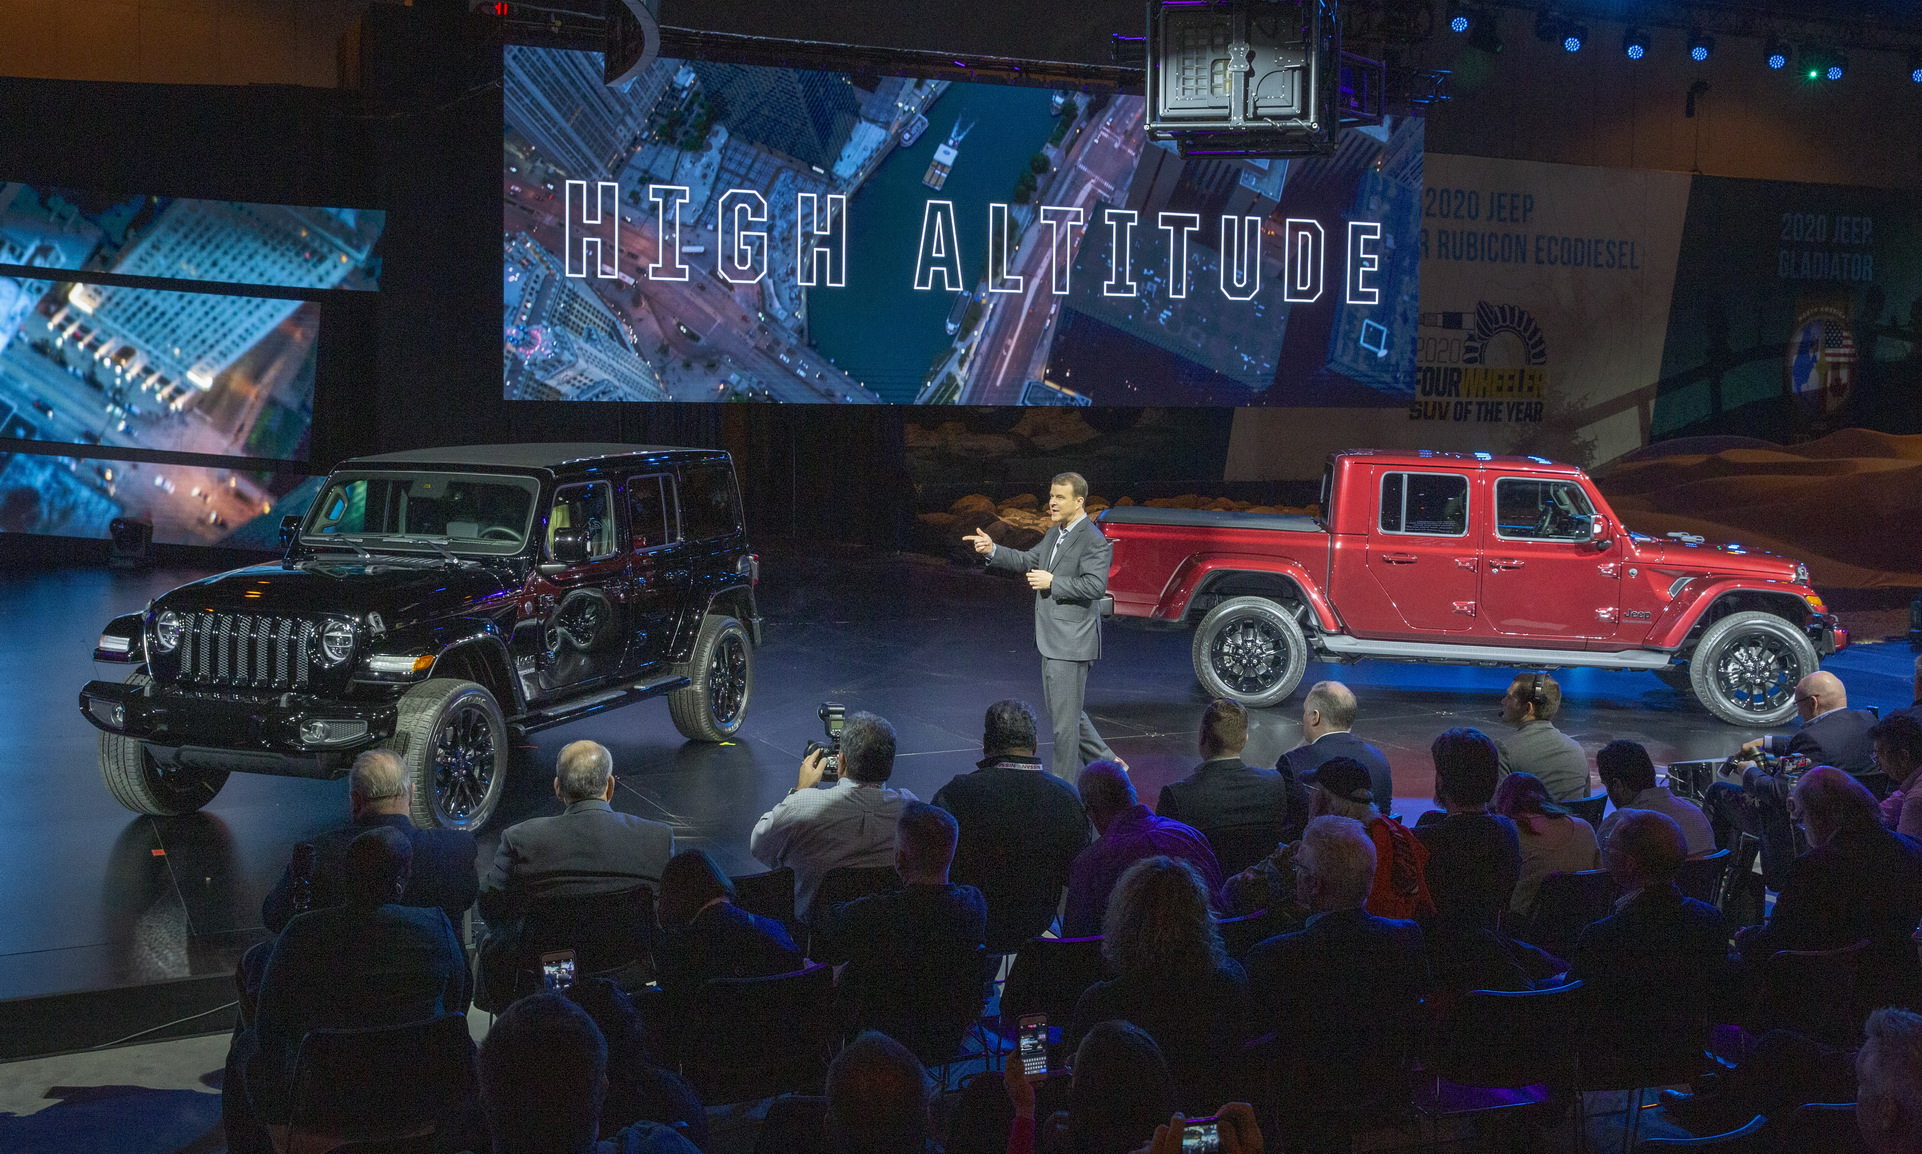 Jeep Rolls Out Special Edition Gladiator And Wrangler Models Carscoops